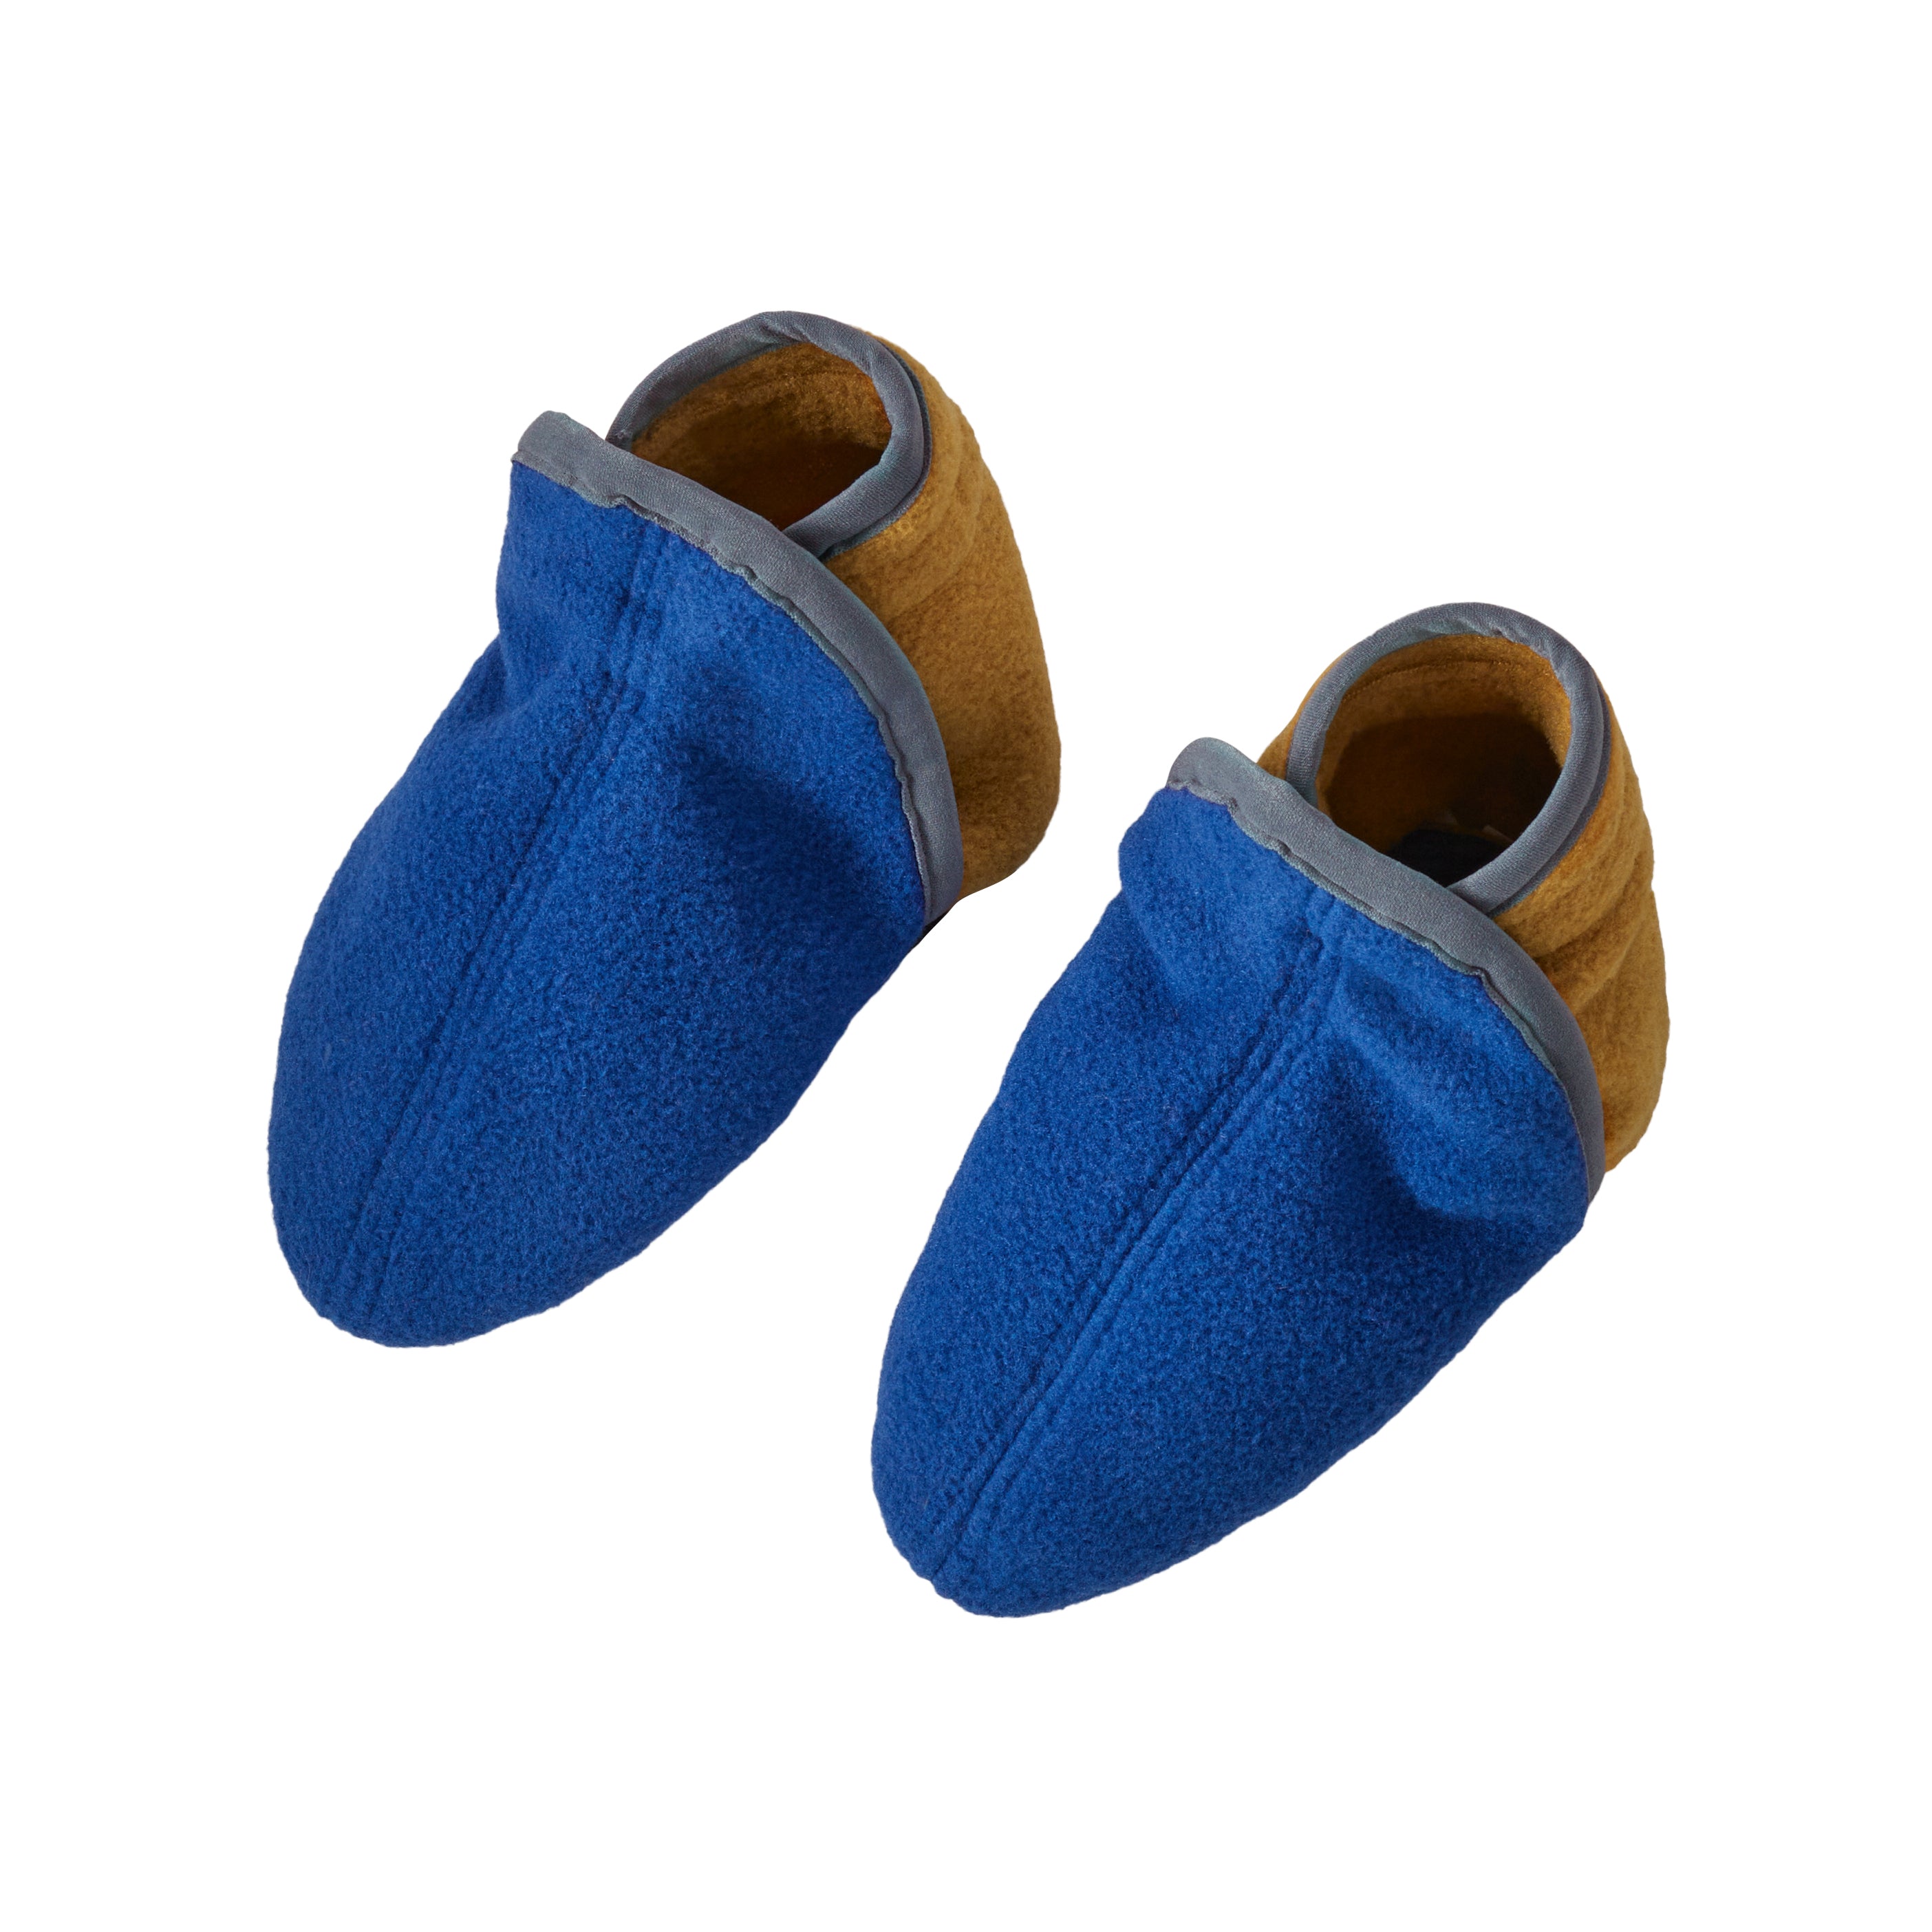 Patagonia Baby Synchilla™ Fleece Booties - Fall 2021